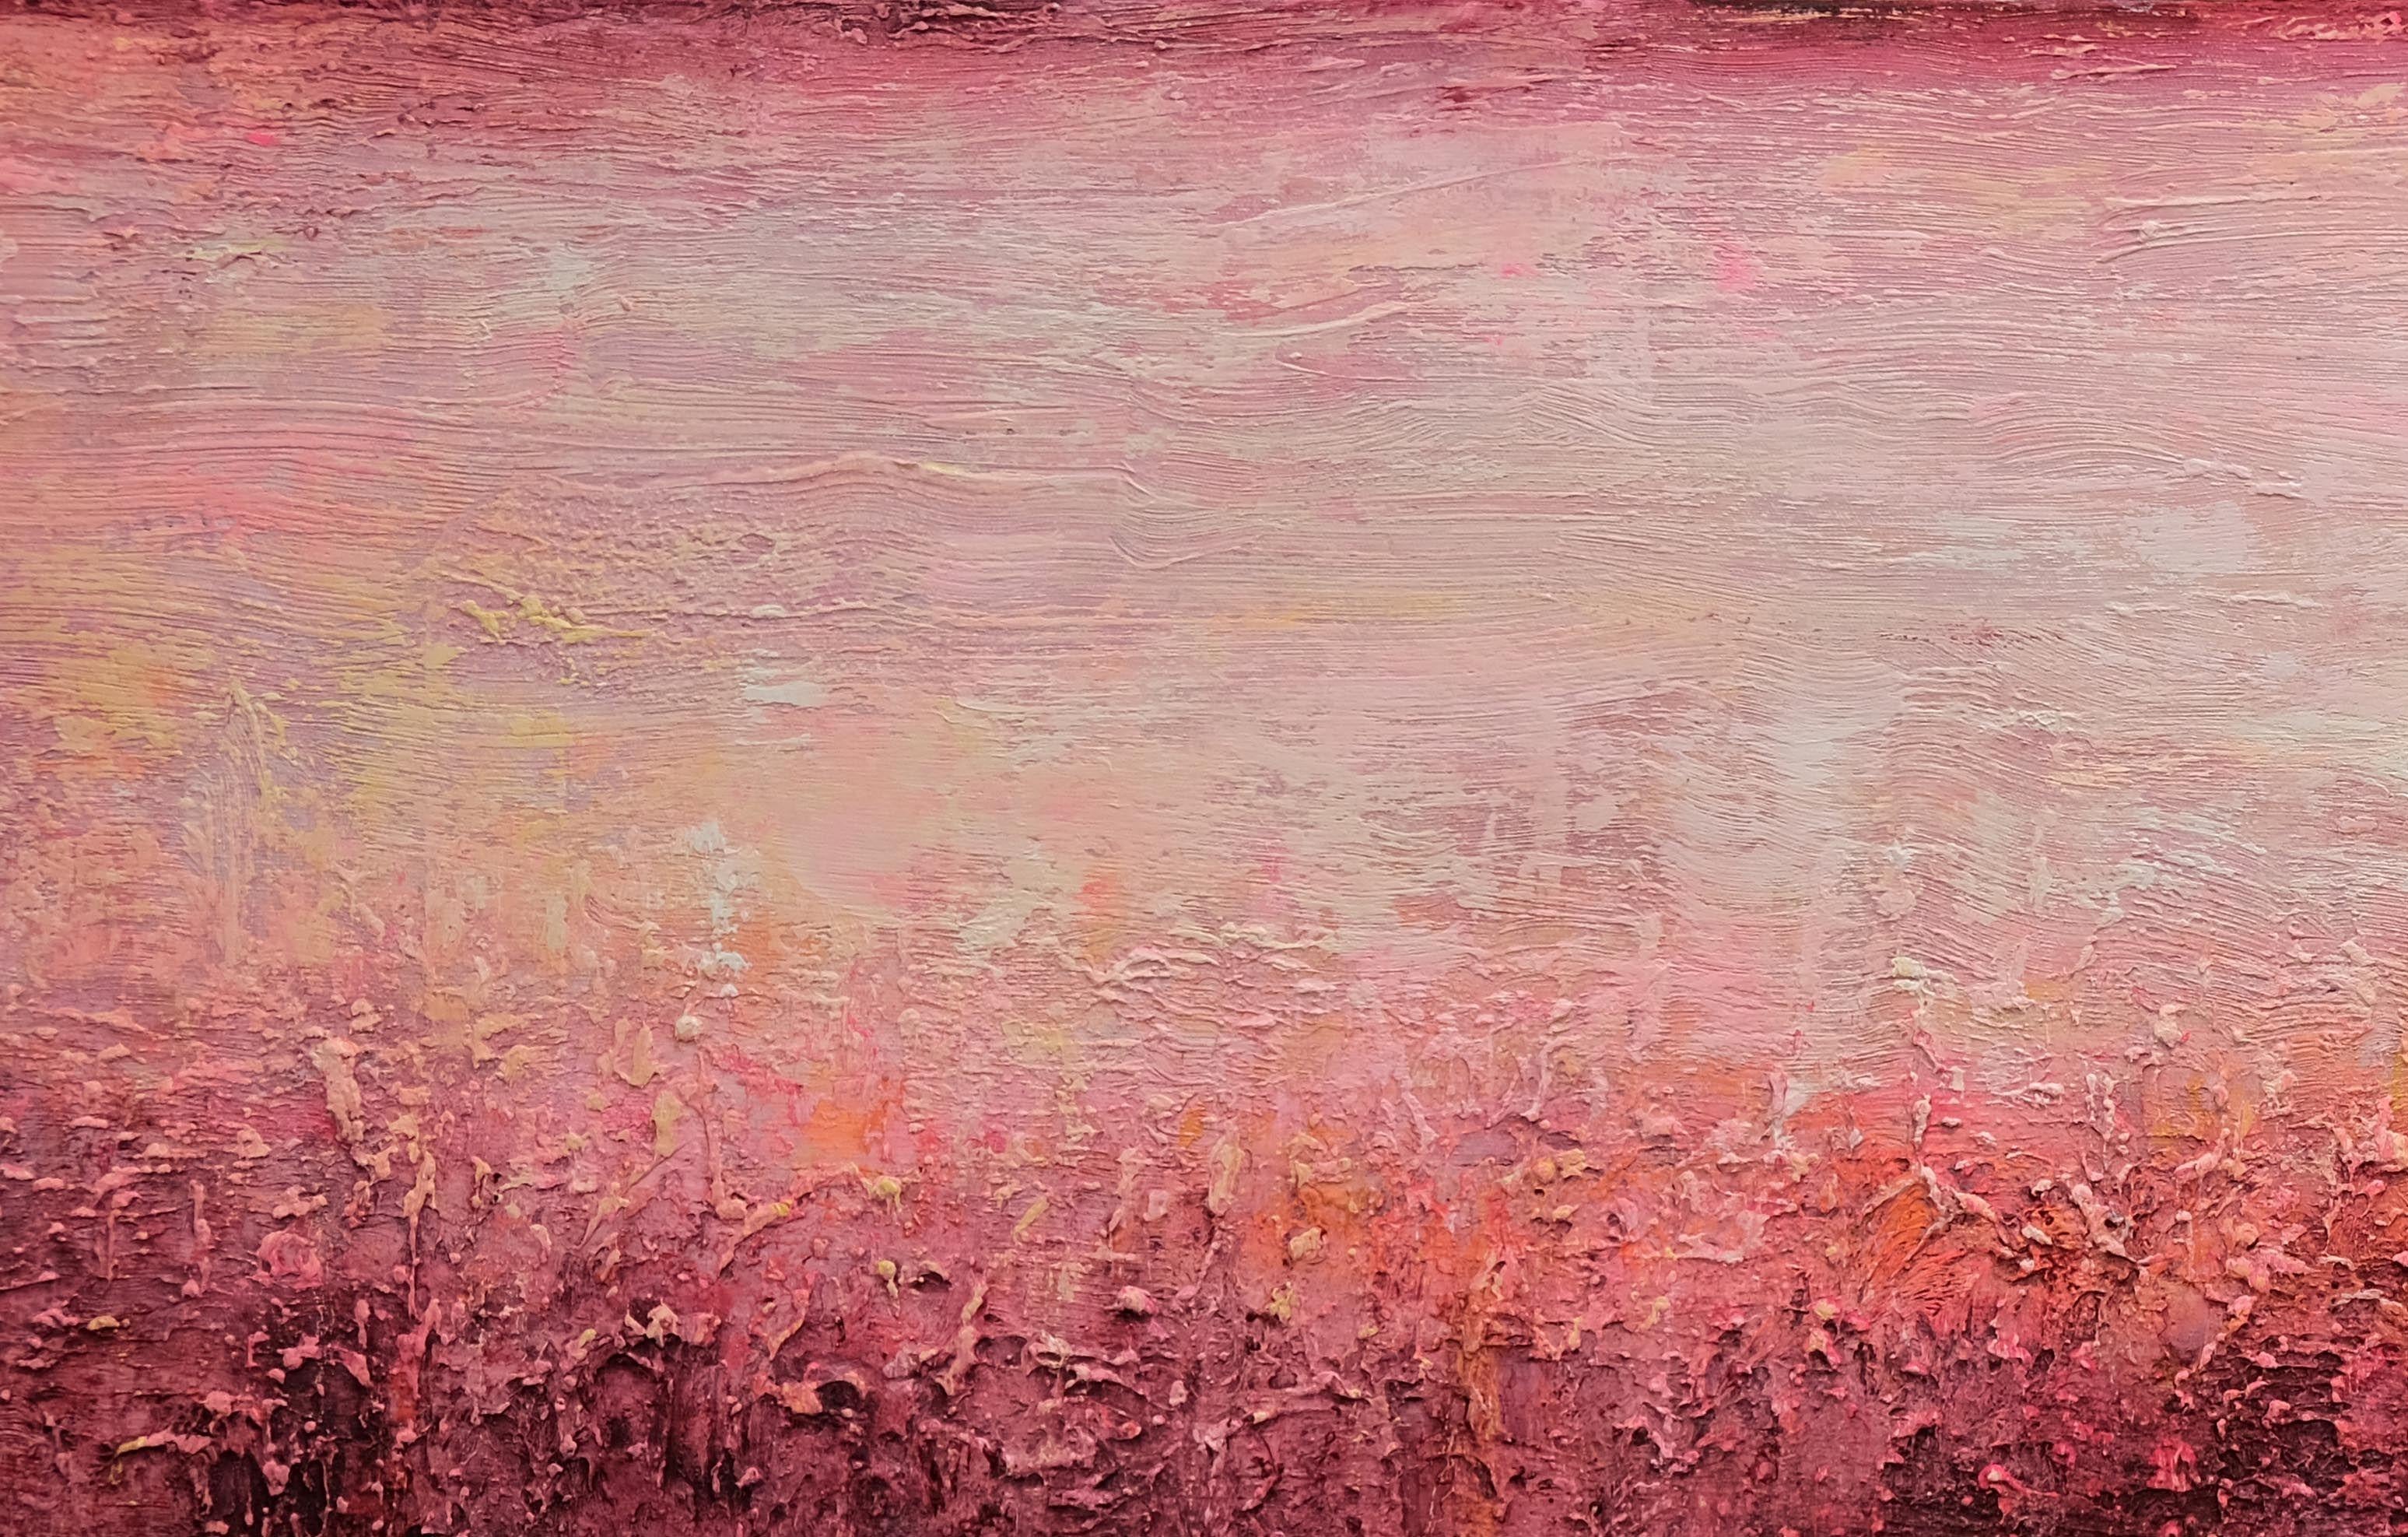 Abstract Sunset Landscape VIII, Painting, Oil on Canvas - Pink Abstract Painting by Behshad Arjomandi